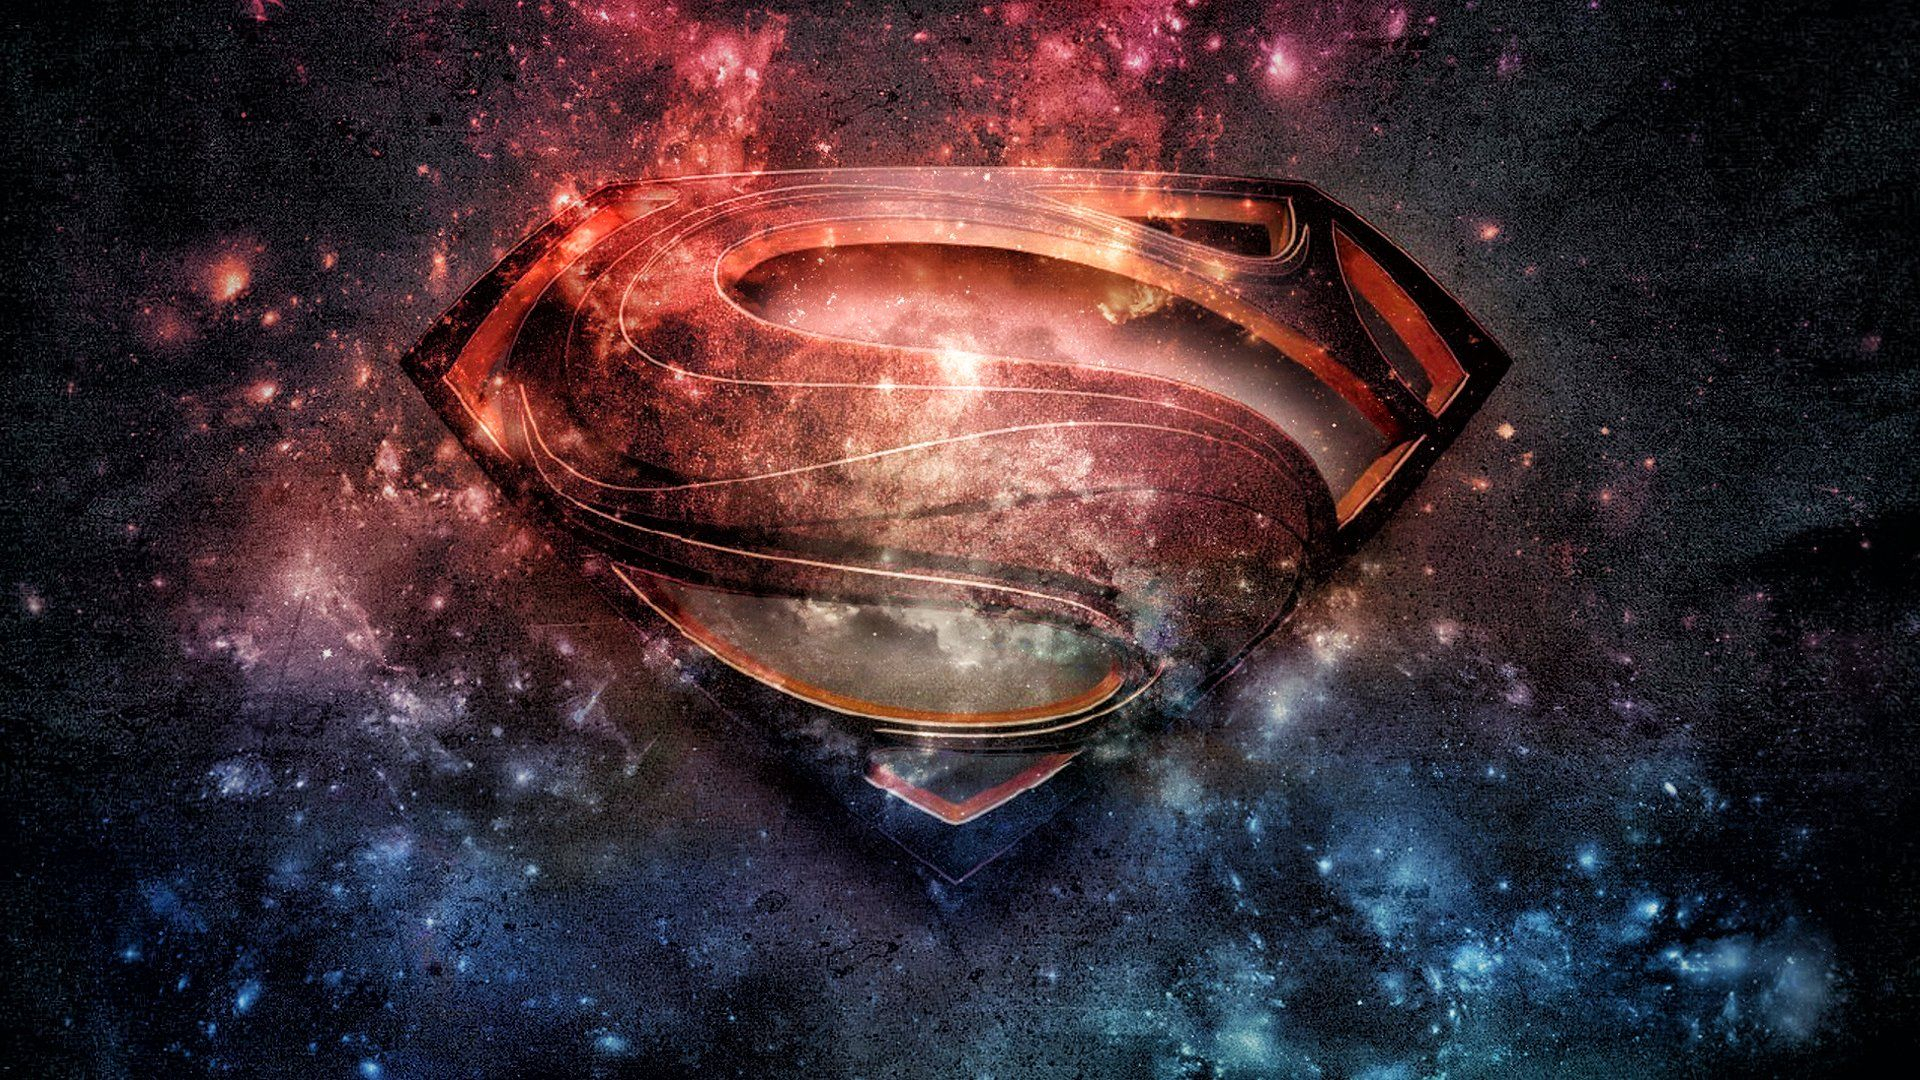 1920x1080 Superman Logo Background Images #1026 The HD Wallpaper | Superman wallpaper logo, Superman comic, Comic movies